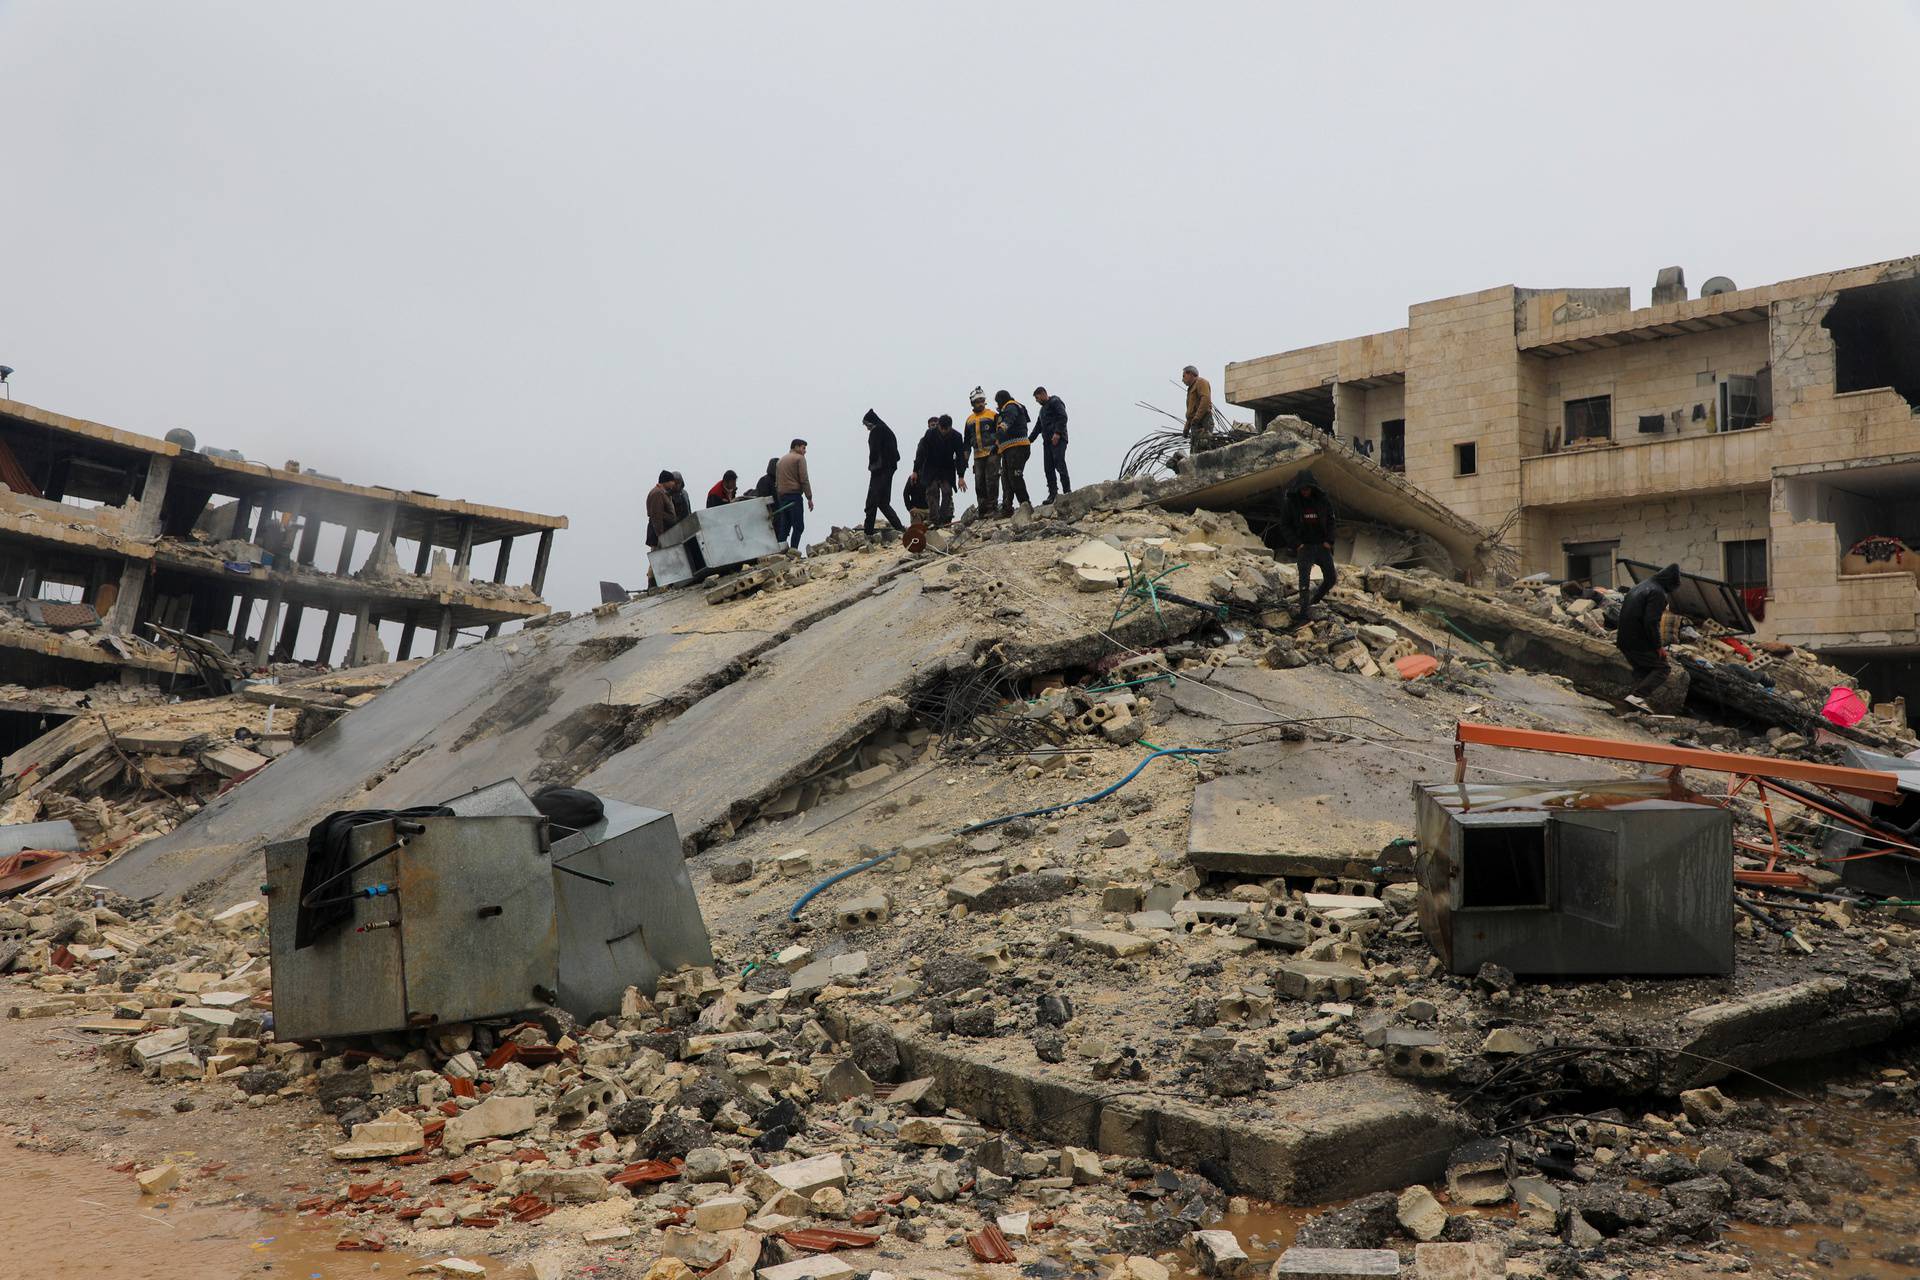 Rescuers search for survivors under the rubble, following an earthquake, in rebel-held town of Jandaris